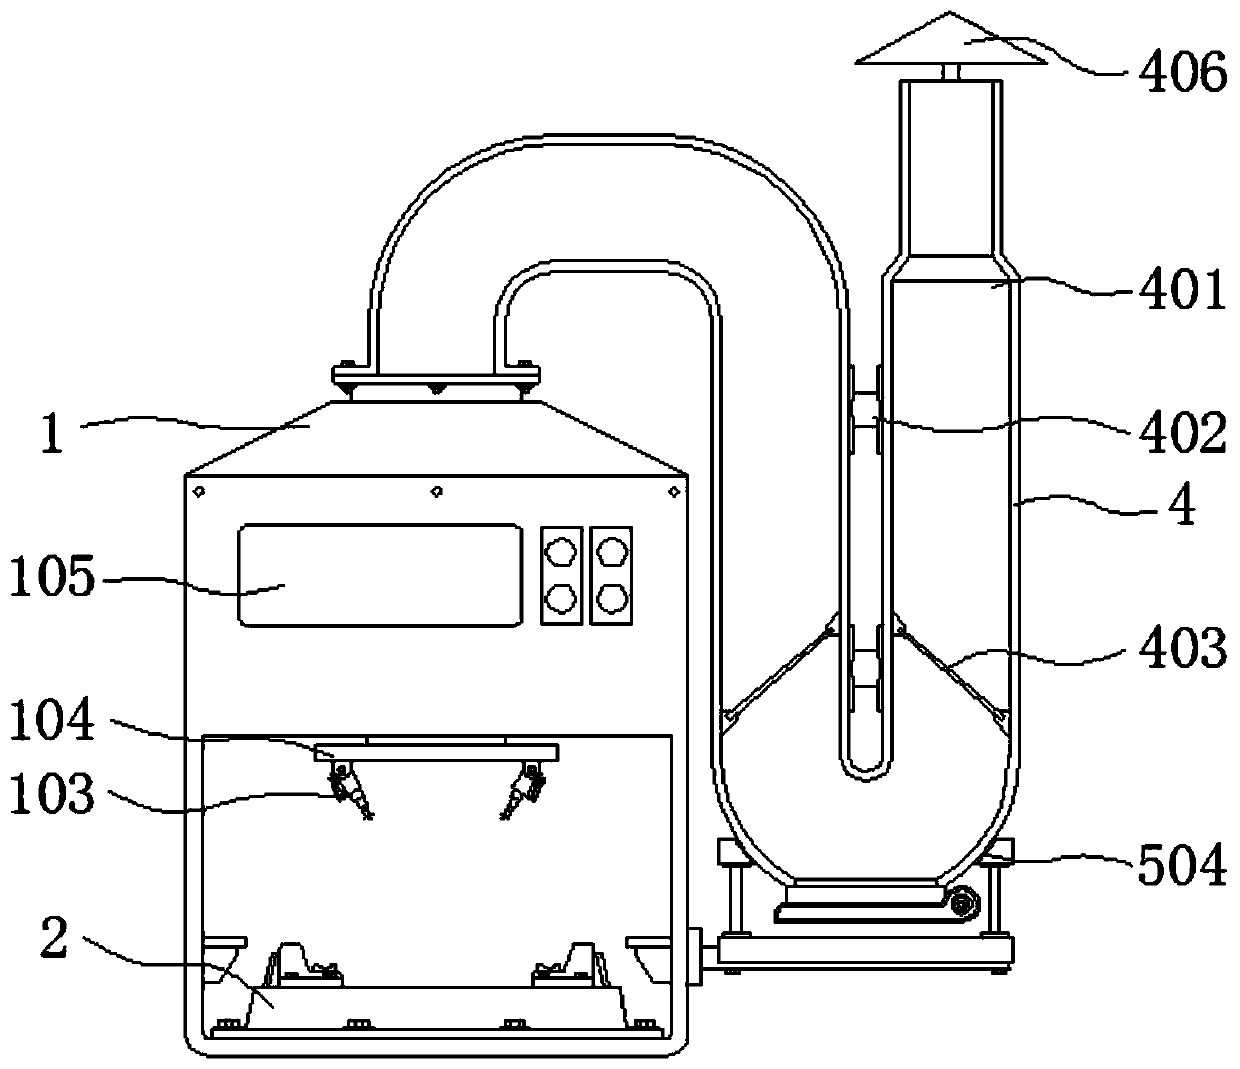 An environment-friendly waste incineration treatment device with waste gas treatment function